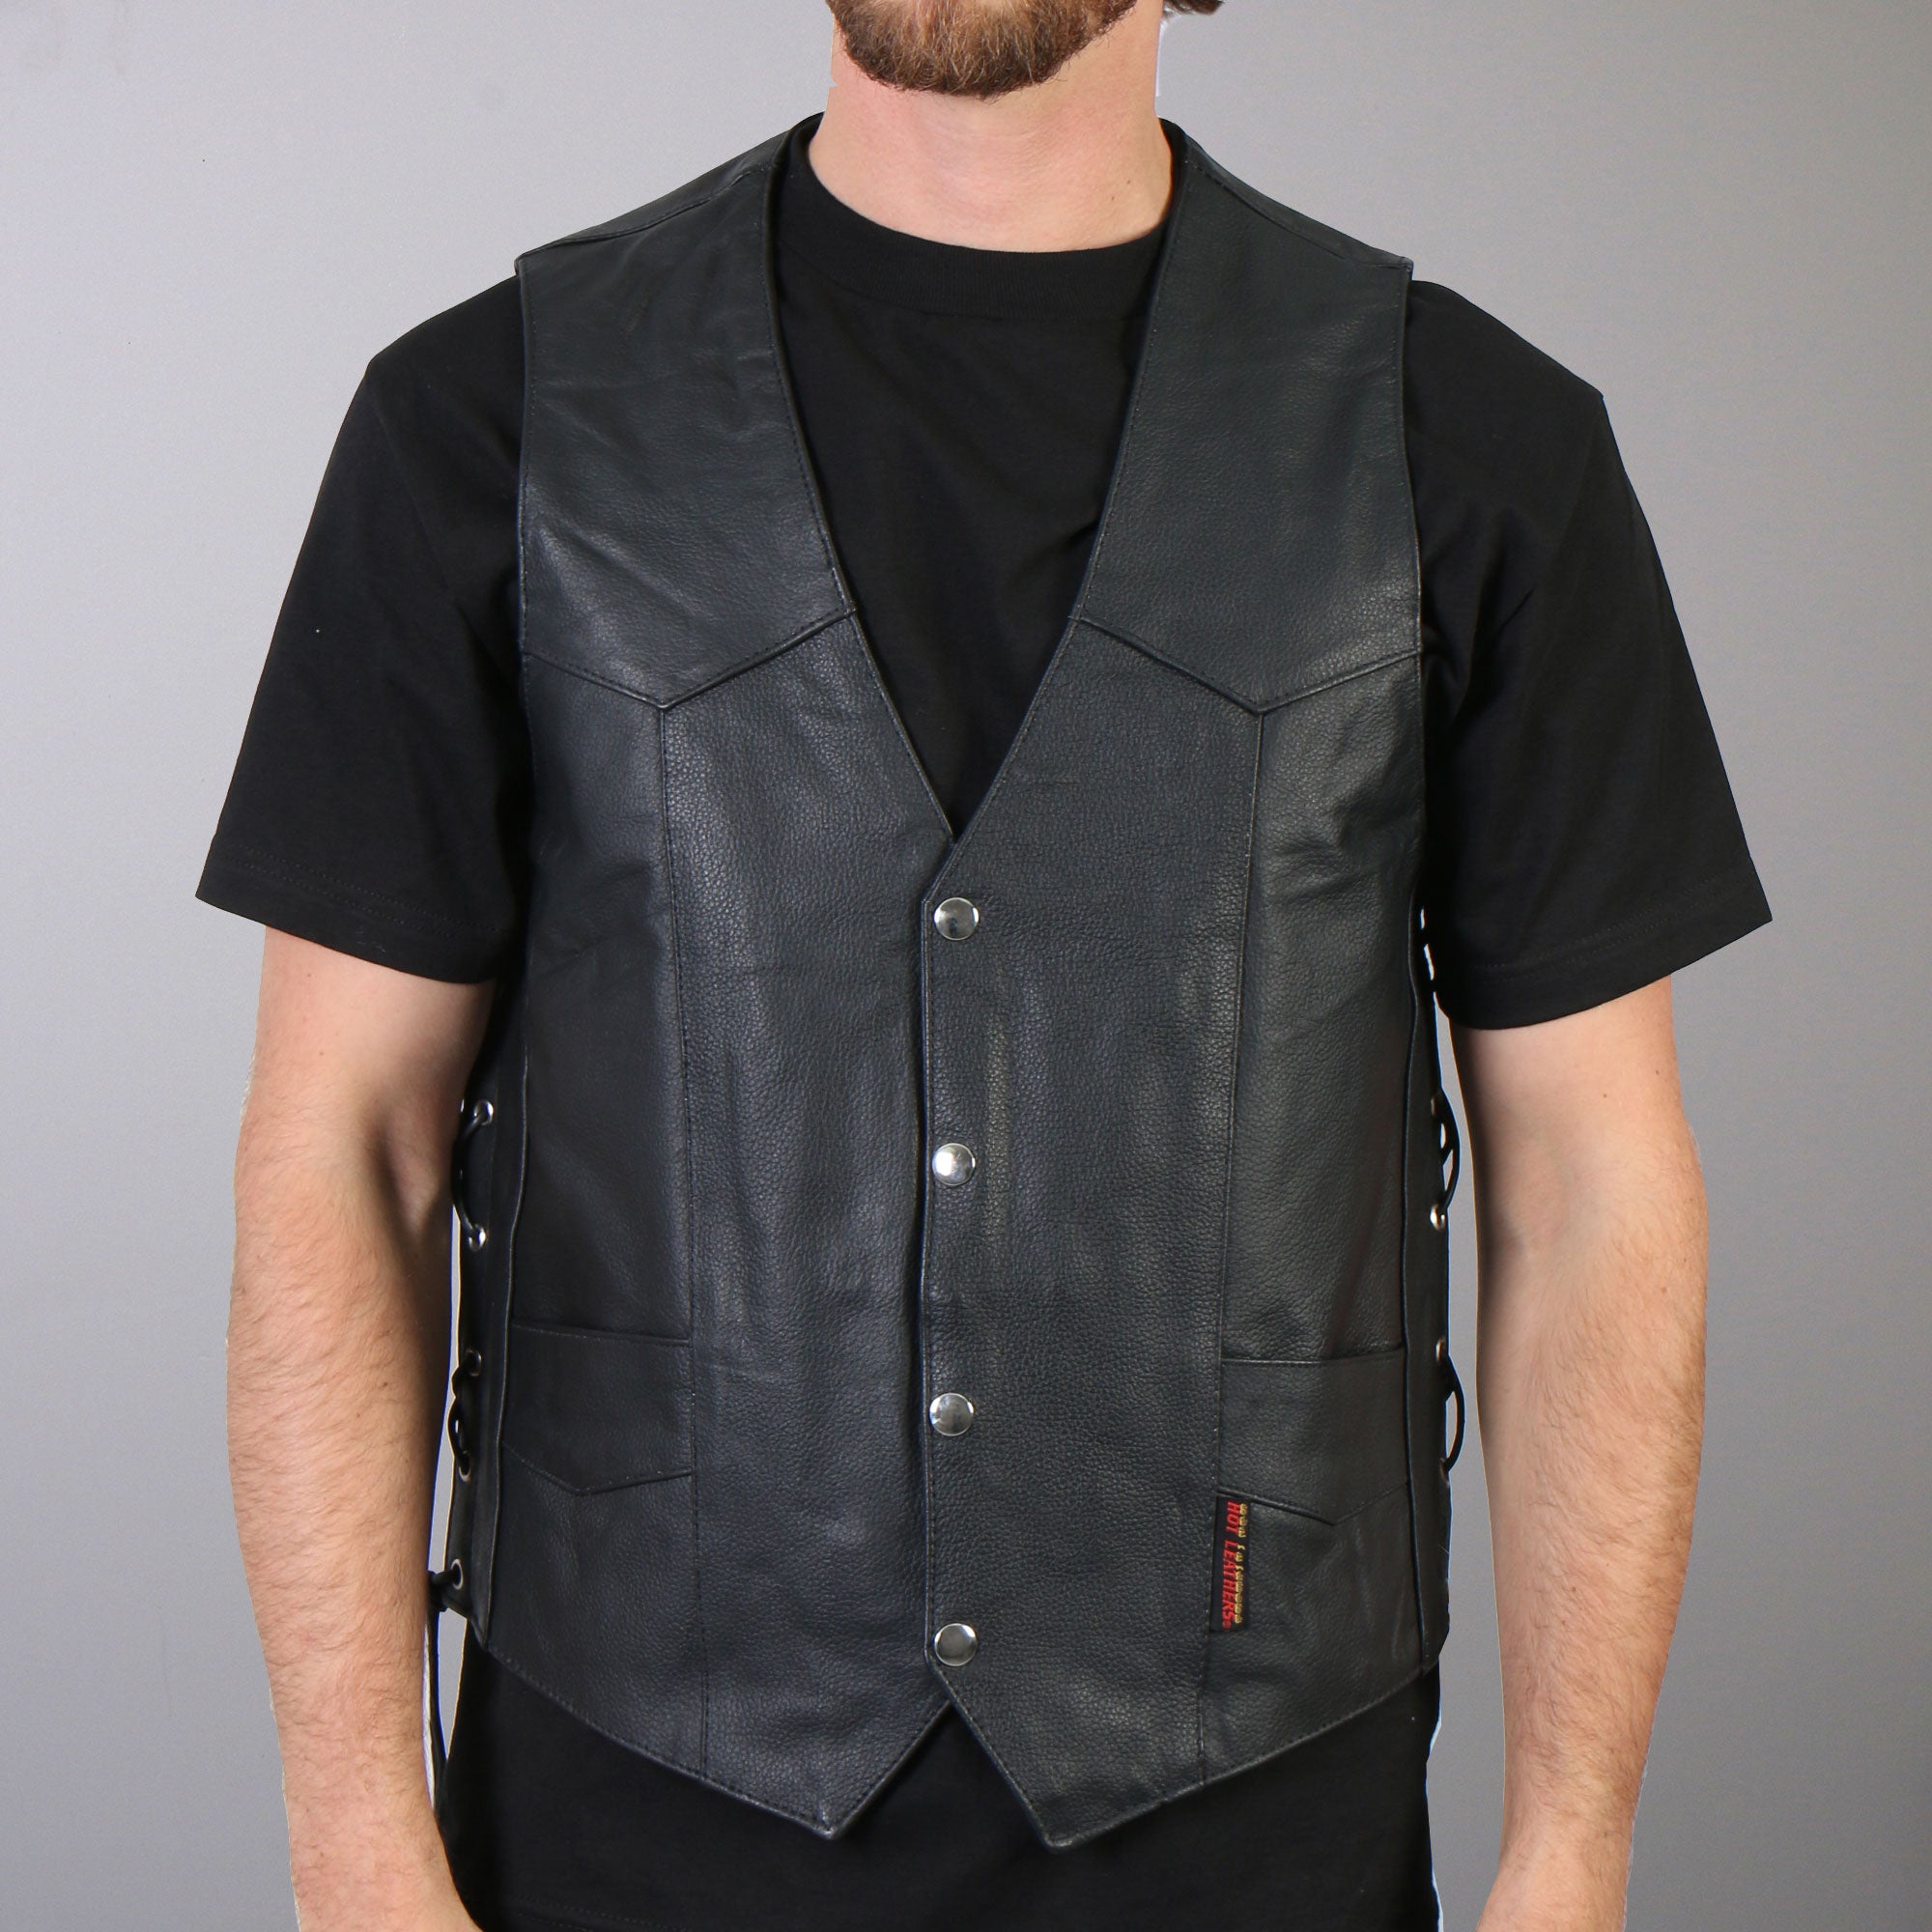 Hot Leathers Men S Concealed Carry Leather Vest